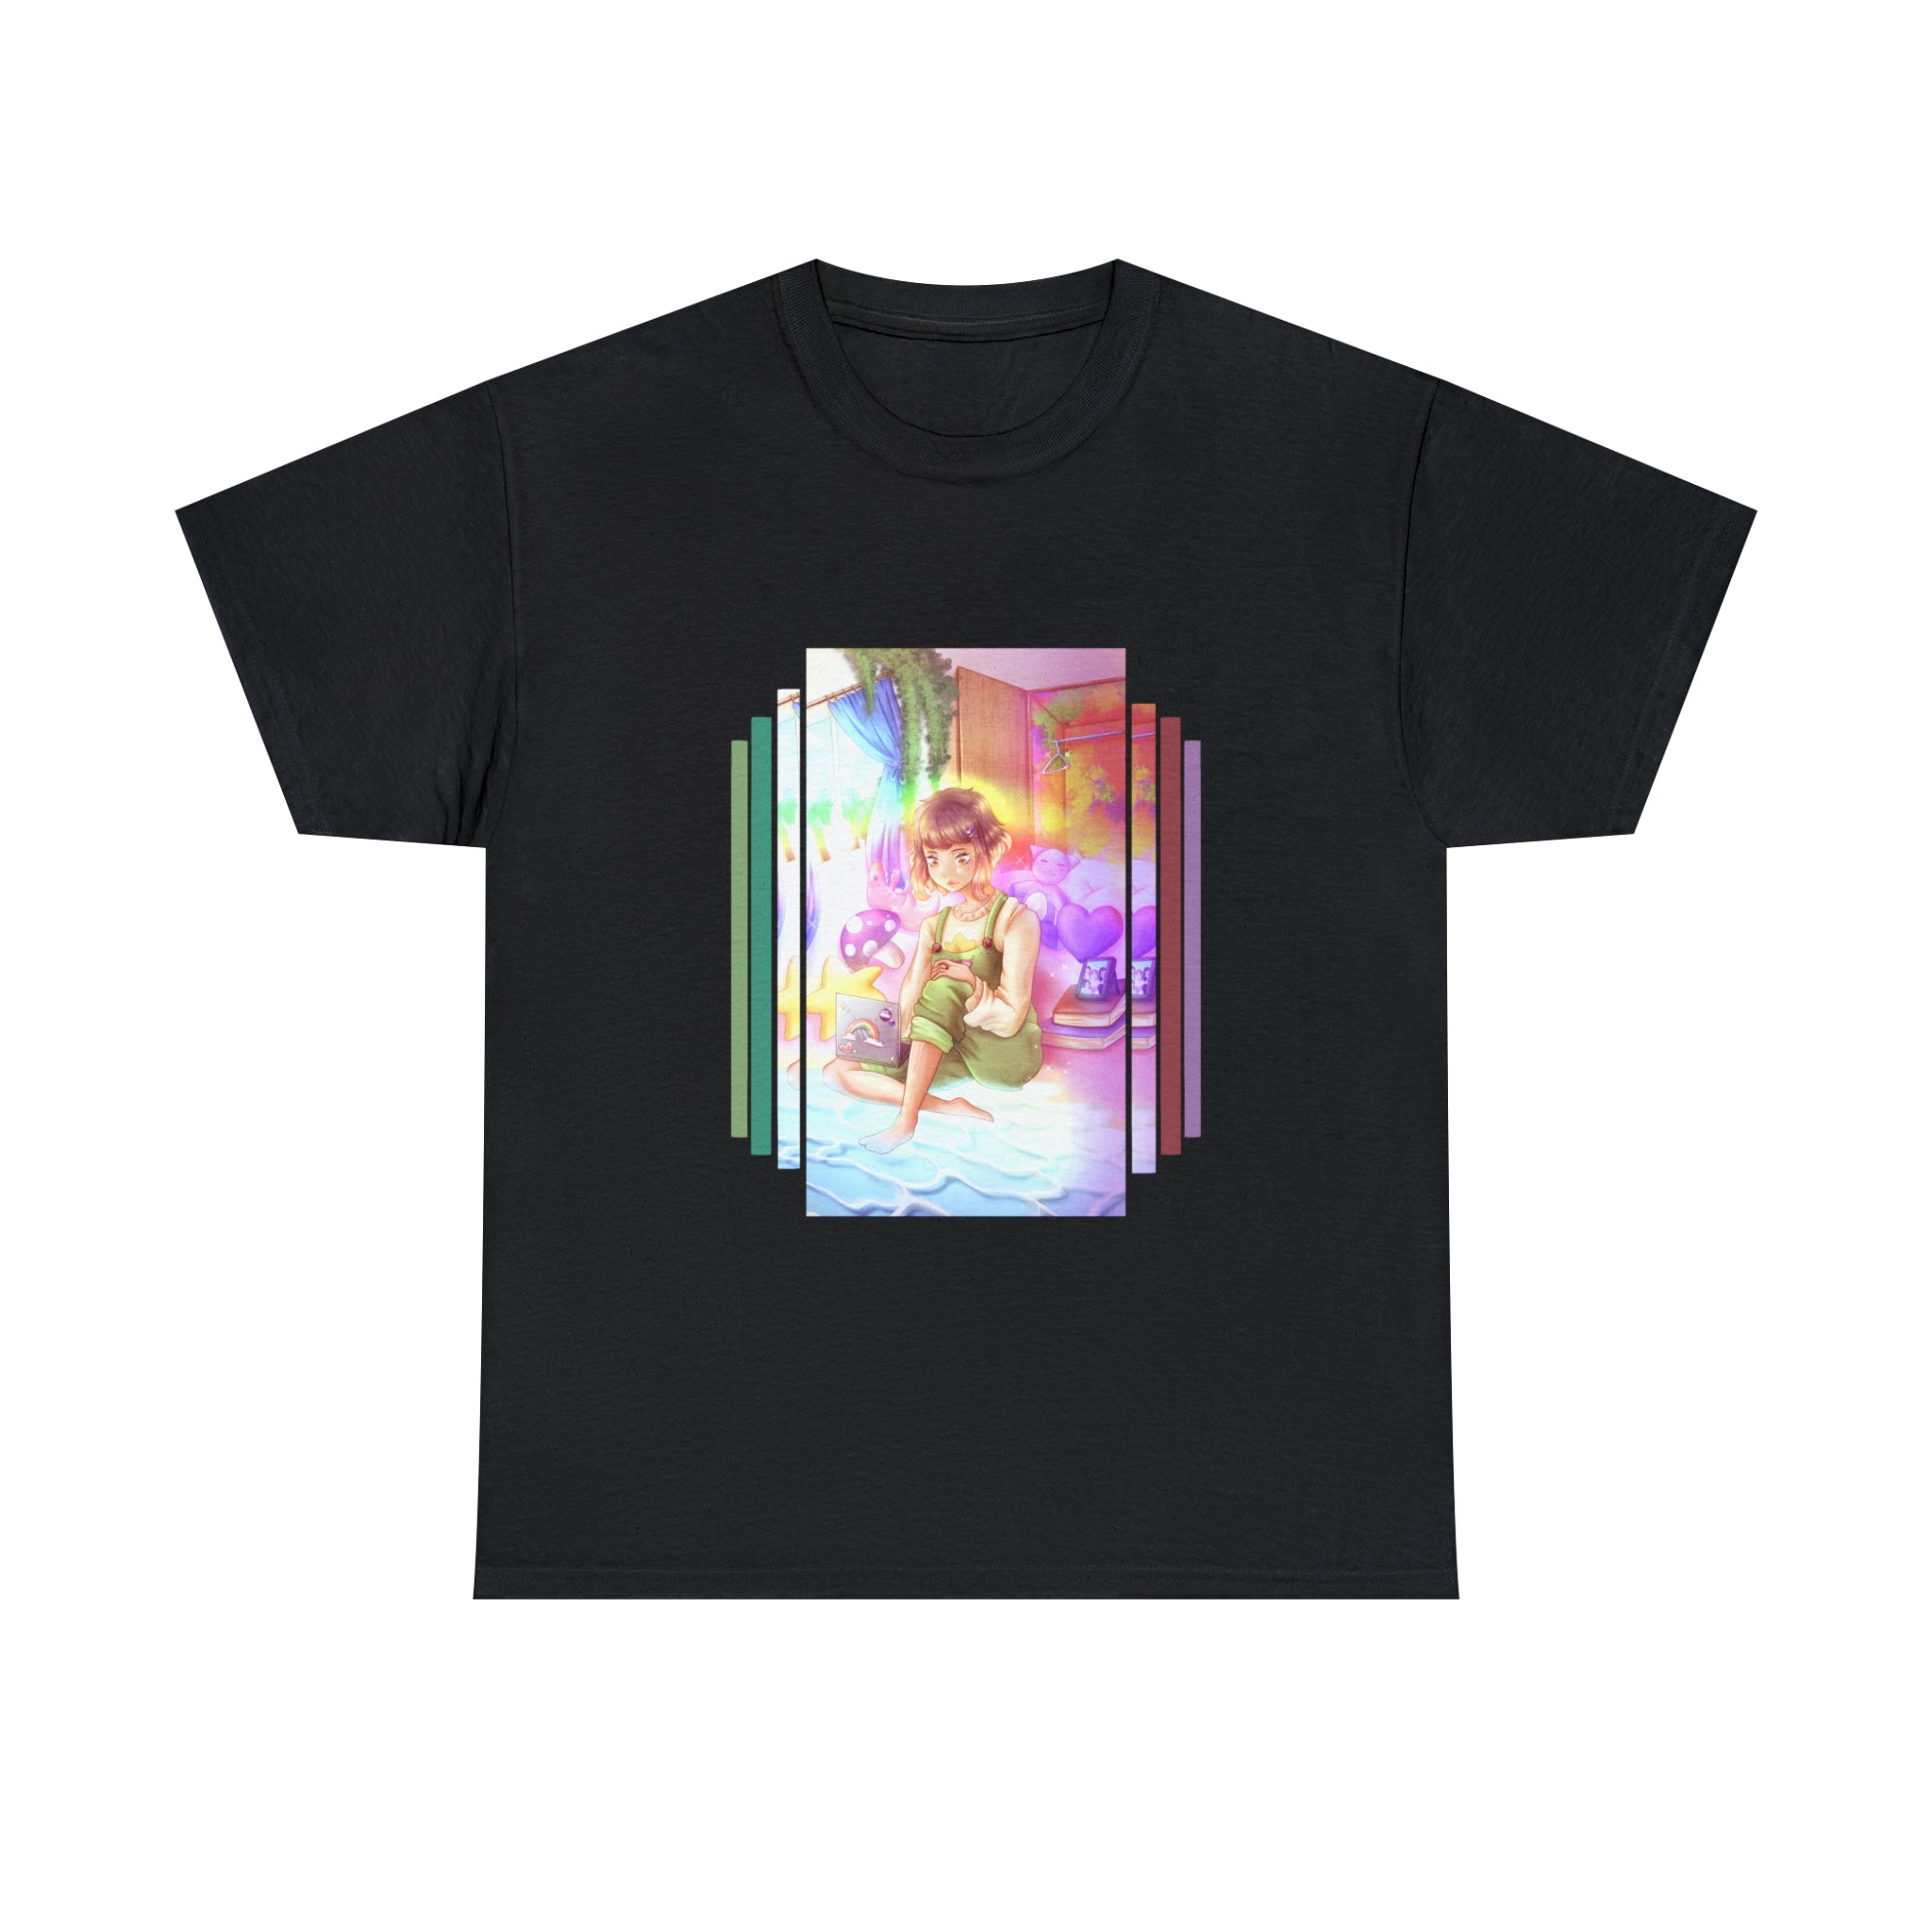 An Room Pride T-Shirt showcasing an exquisite artwork of a girl sitting on a bed, expertly crafted from comfortable cotton.